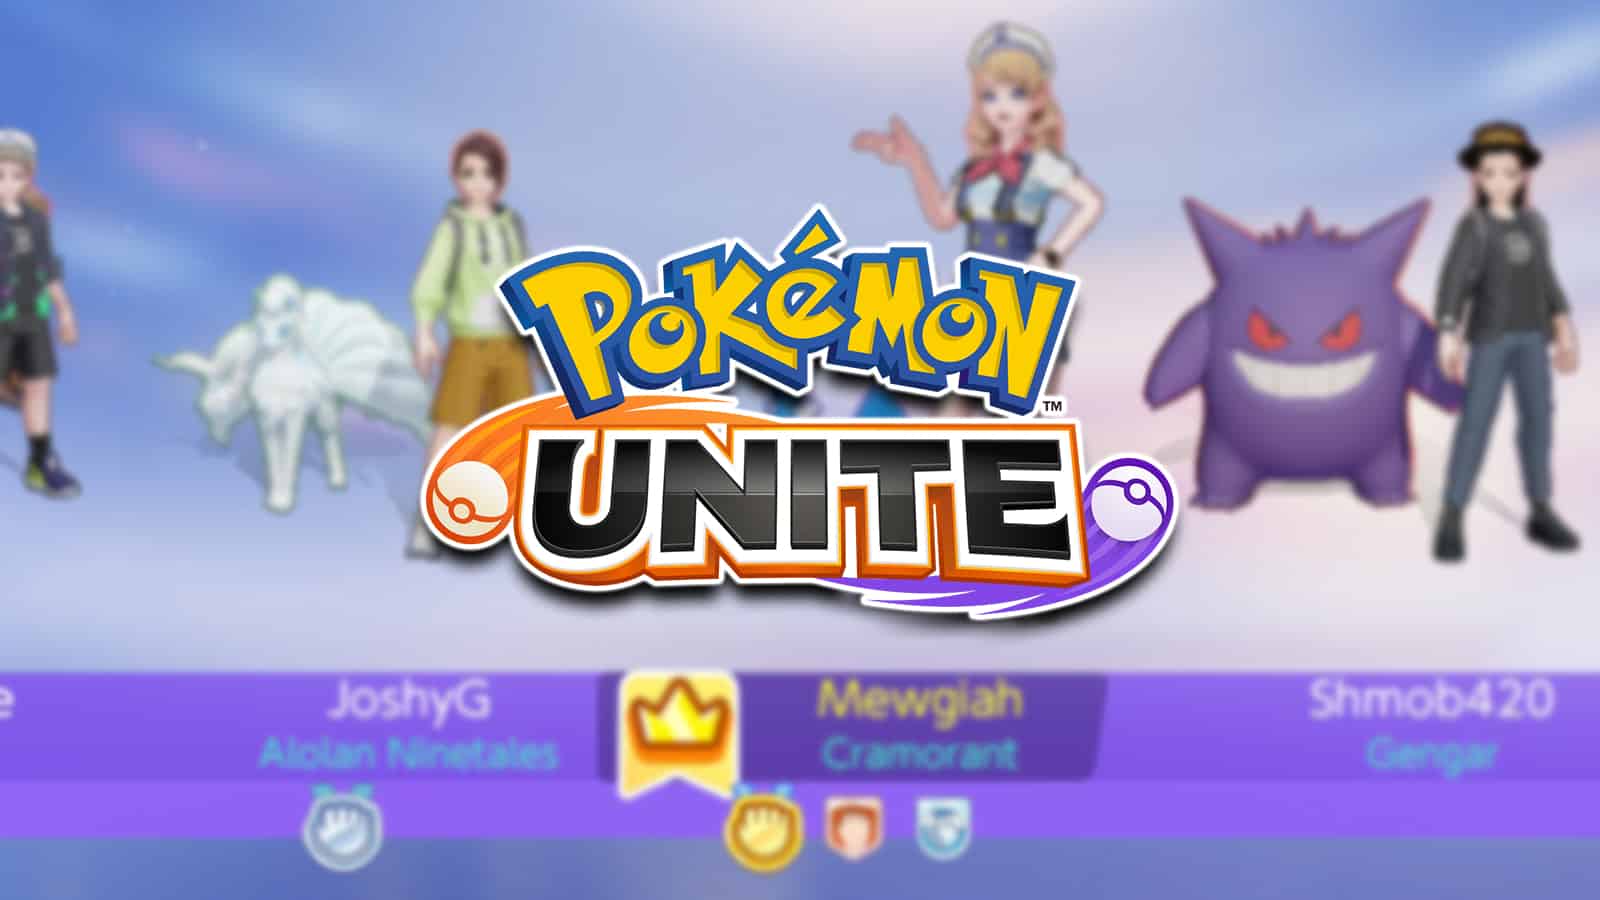 Pokemon Unite Badge meaning and medals explained